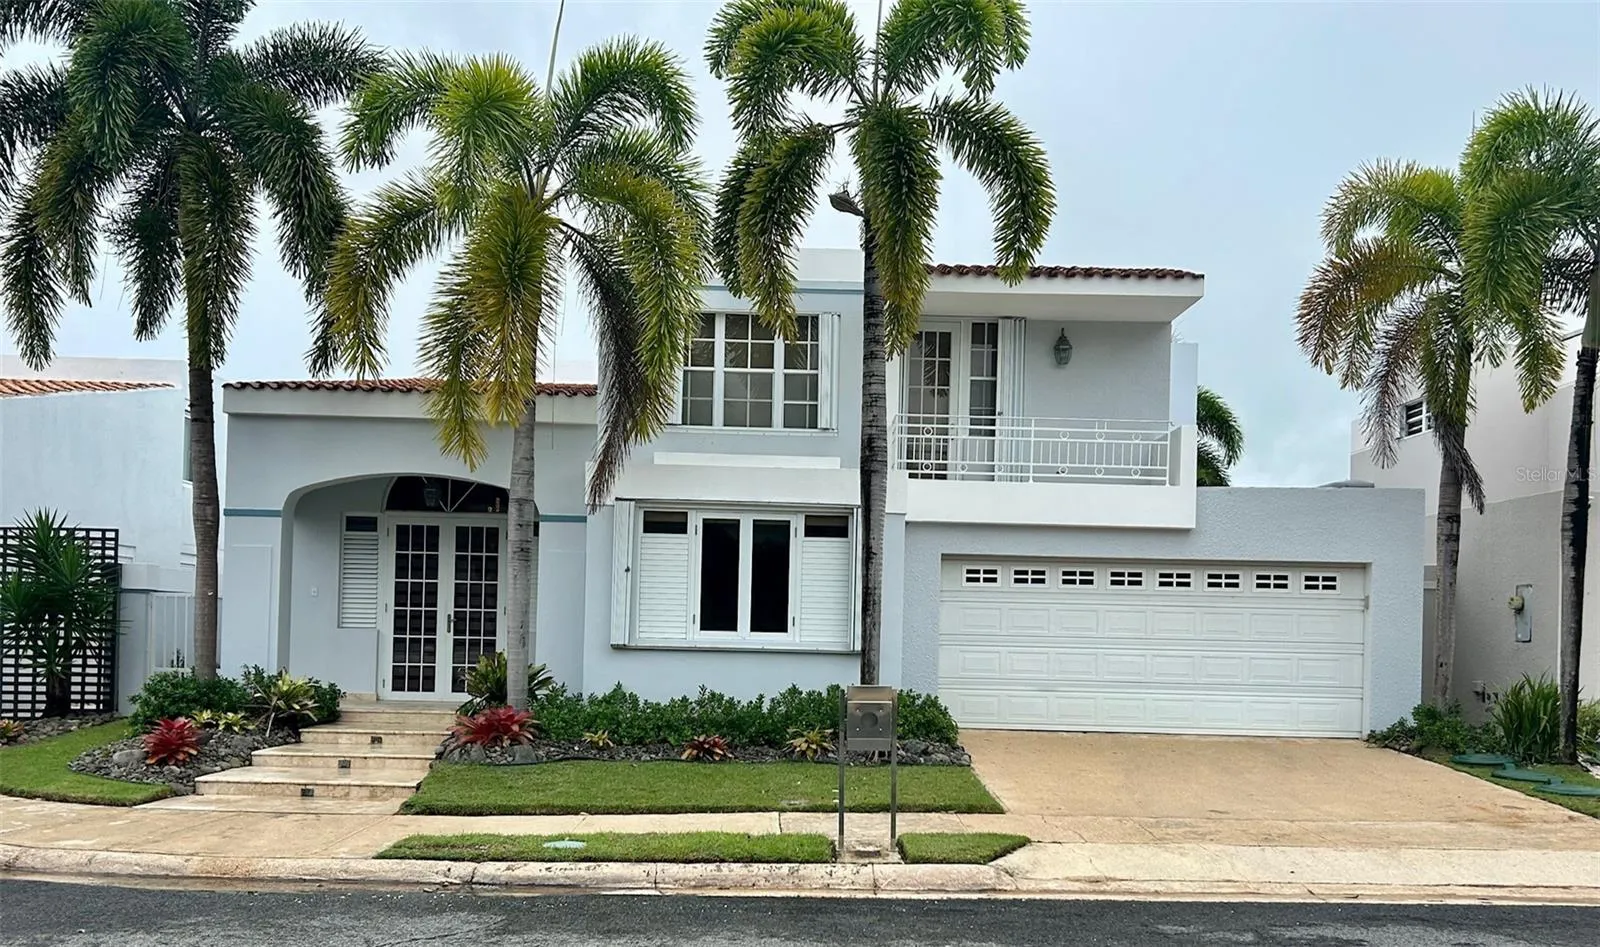 60 PALMA REAL, LADY PALM, Guaynabo, Puerto Rico 00966, 5 Bedrooms Bedrooms, ,4 BathroomsBathrooms,Residential,For Sale,PALMA REAL,PALMA REAL, LADY PALM,PR9106043